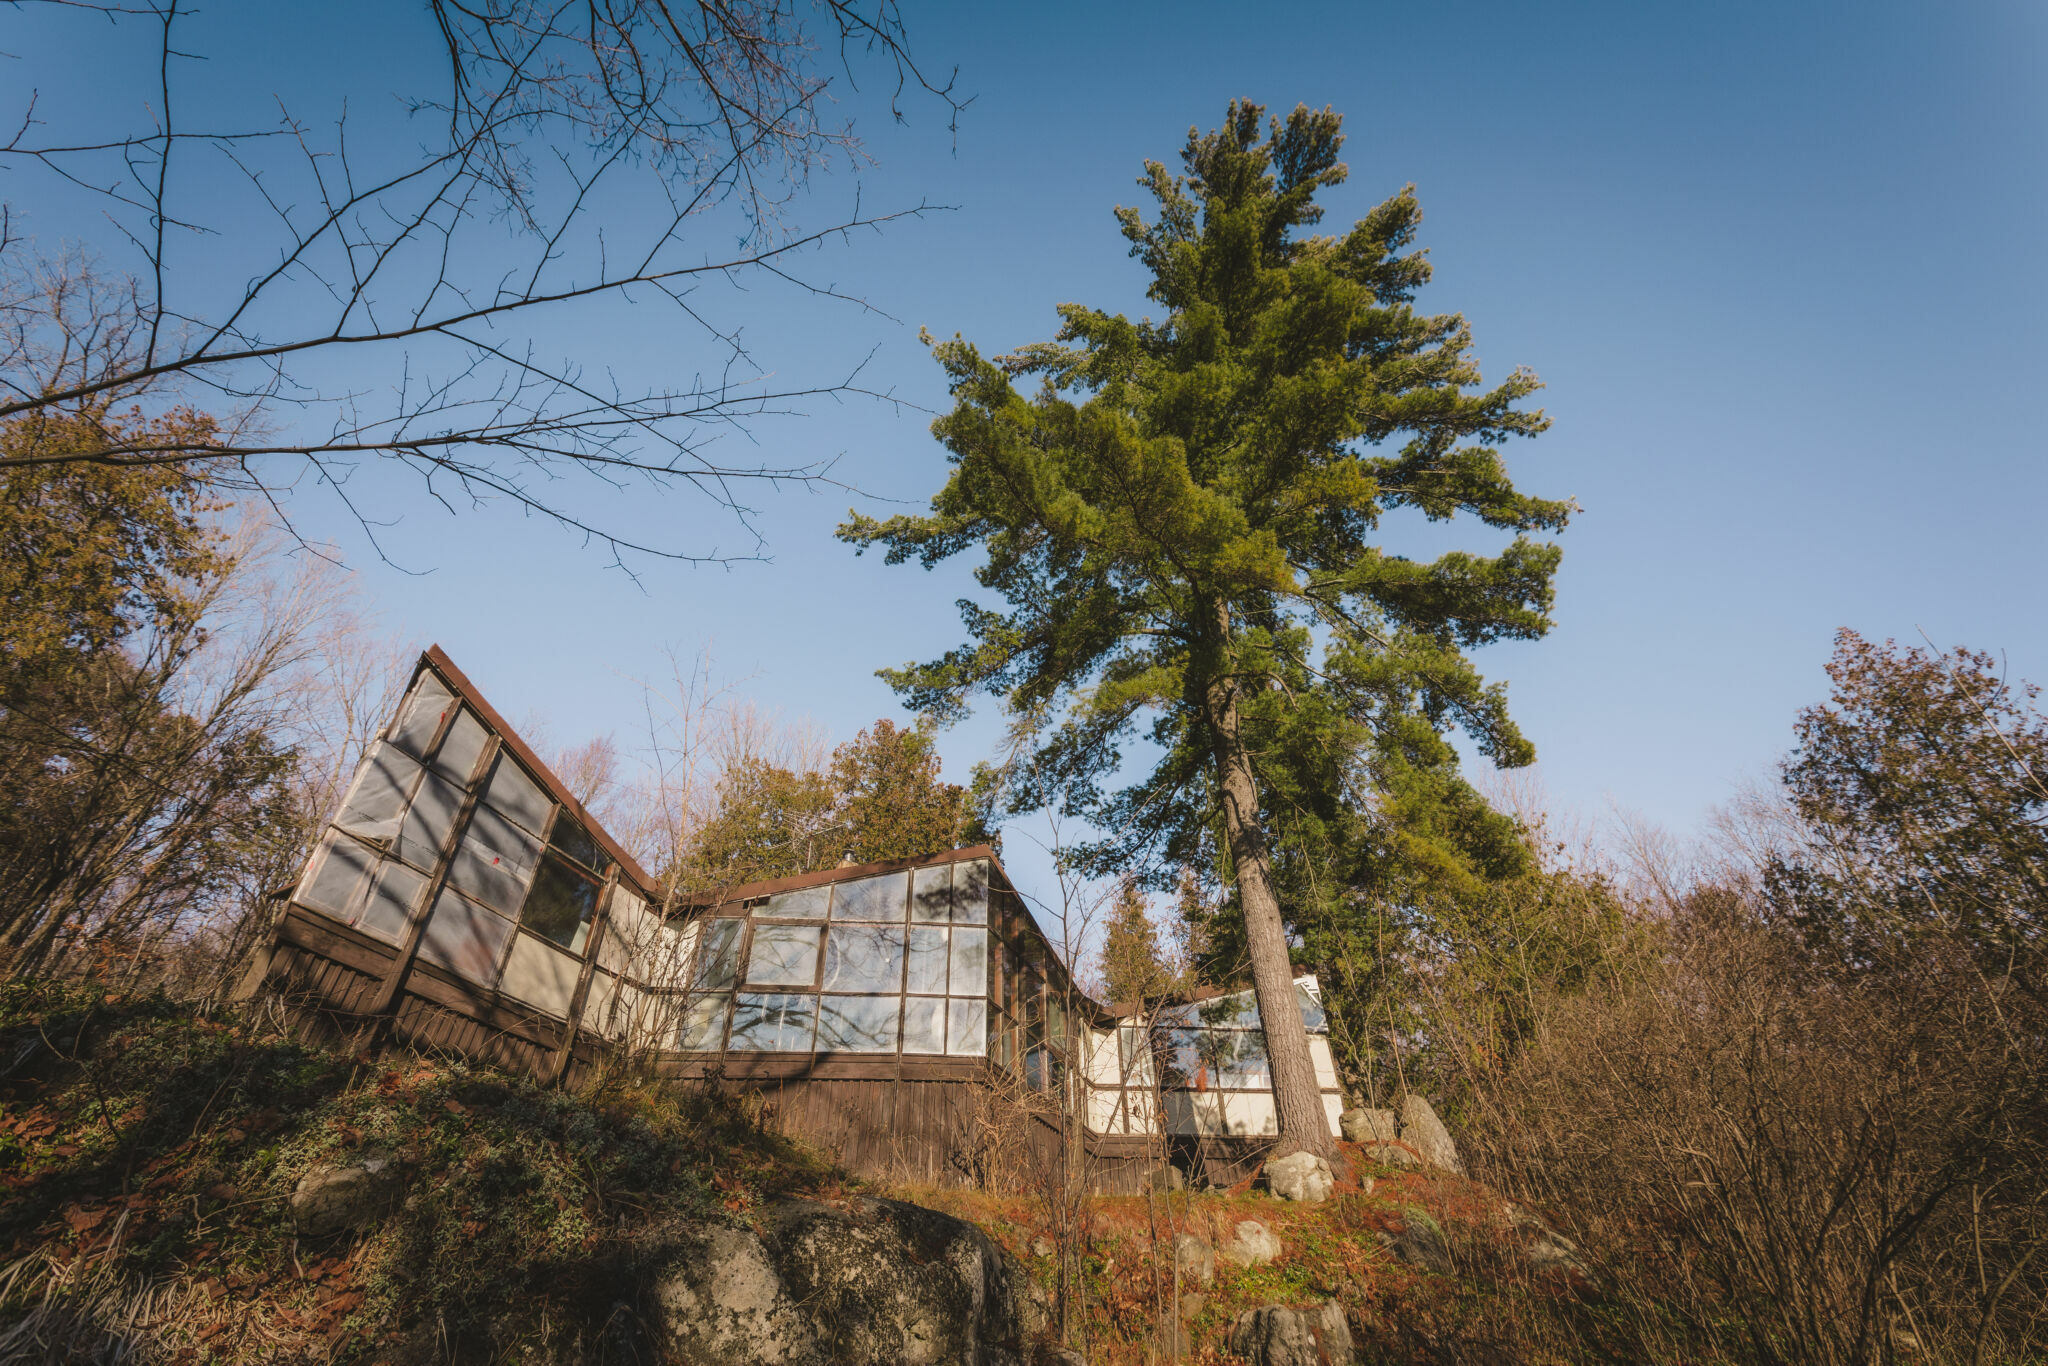 Tall tree in front of a geometrically shaped house in a rocky setting.